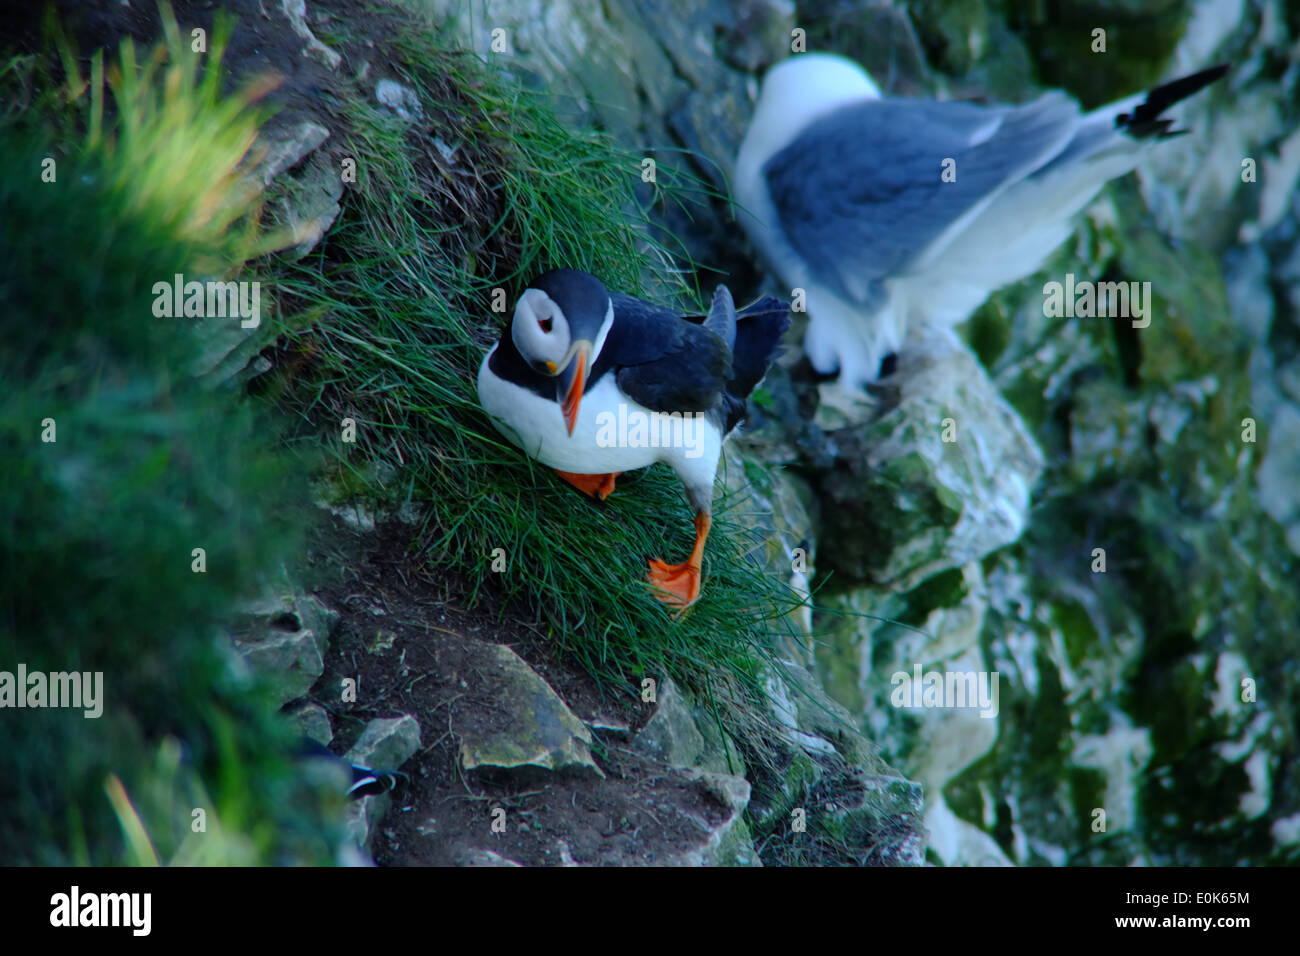 Puffin on cliff. Stock Photo